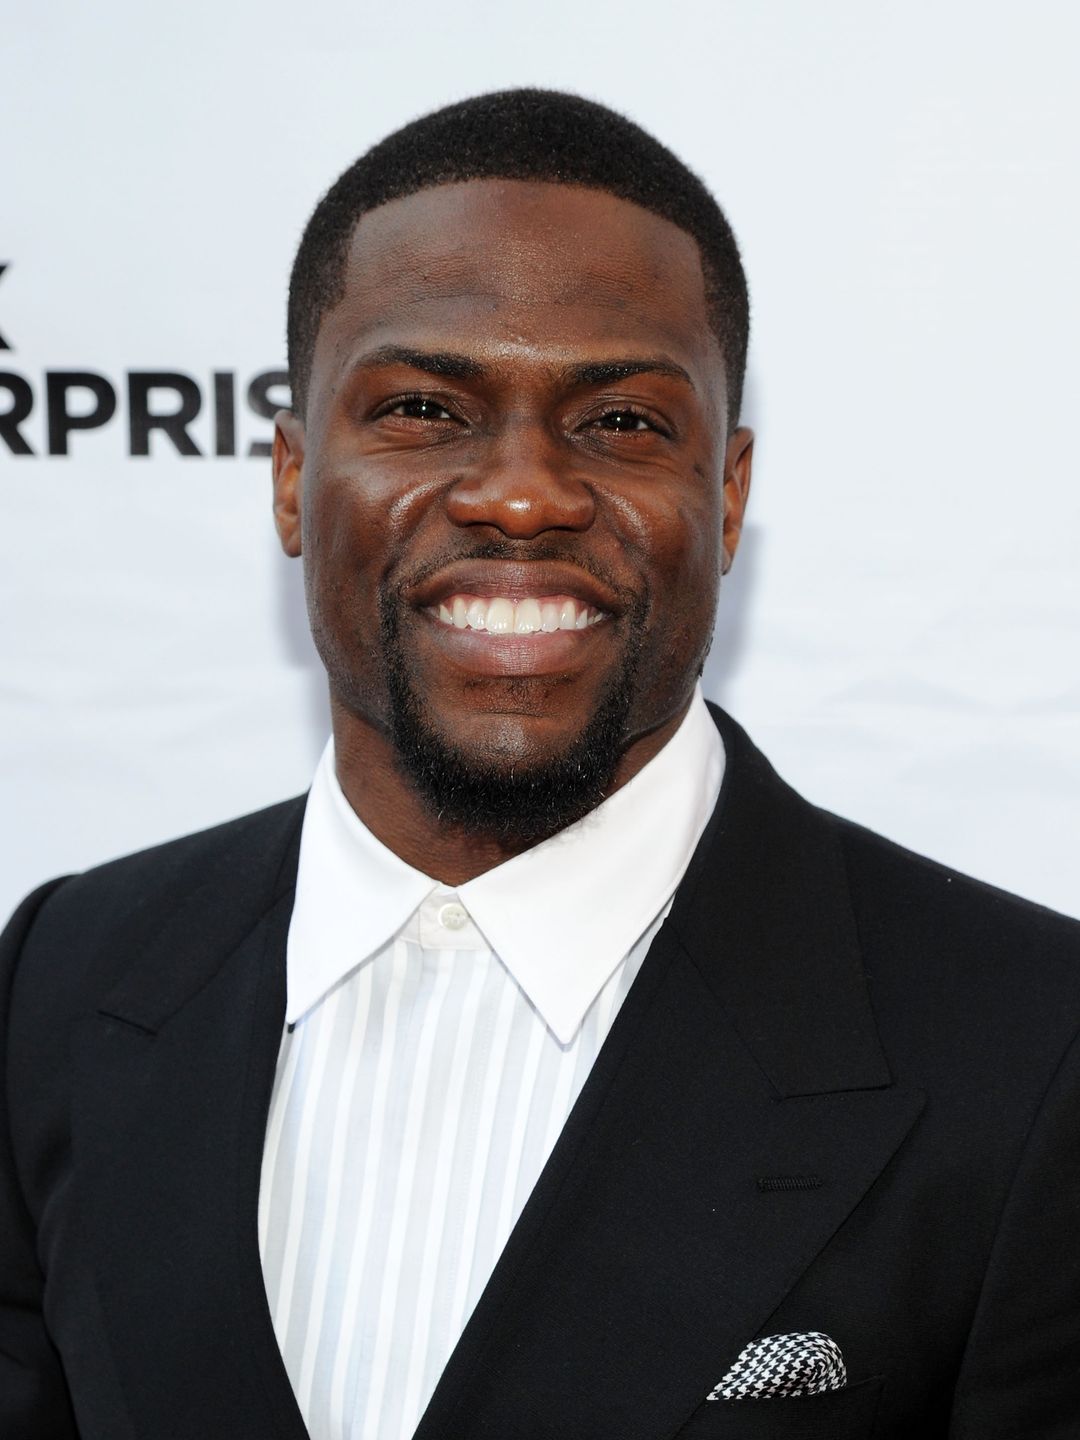 Kevin Hart young age